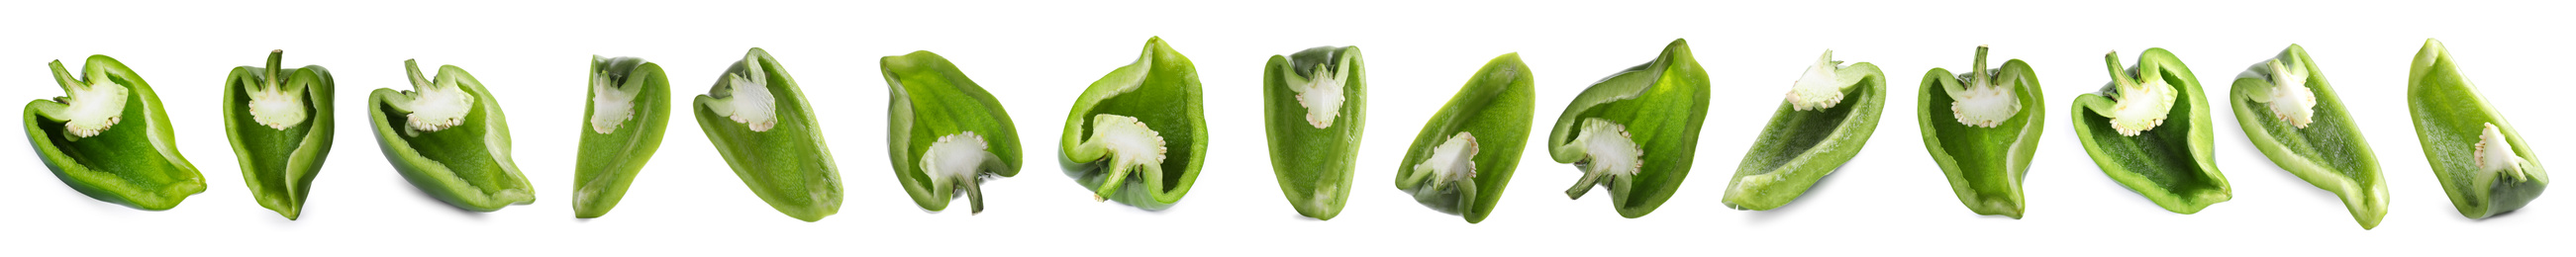 Image of Set of cut ripe green bell peppers on white background/ Banner design 